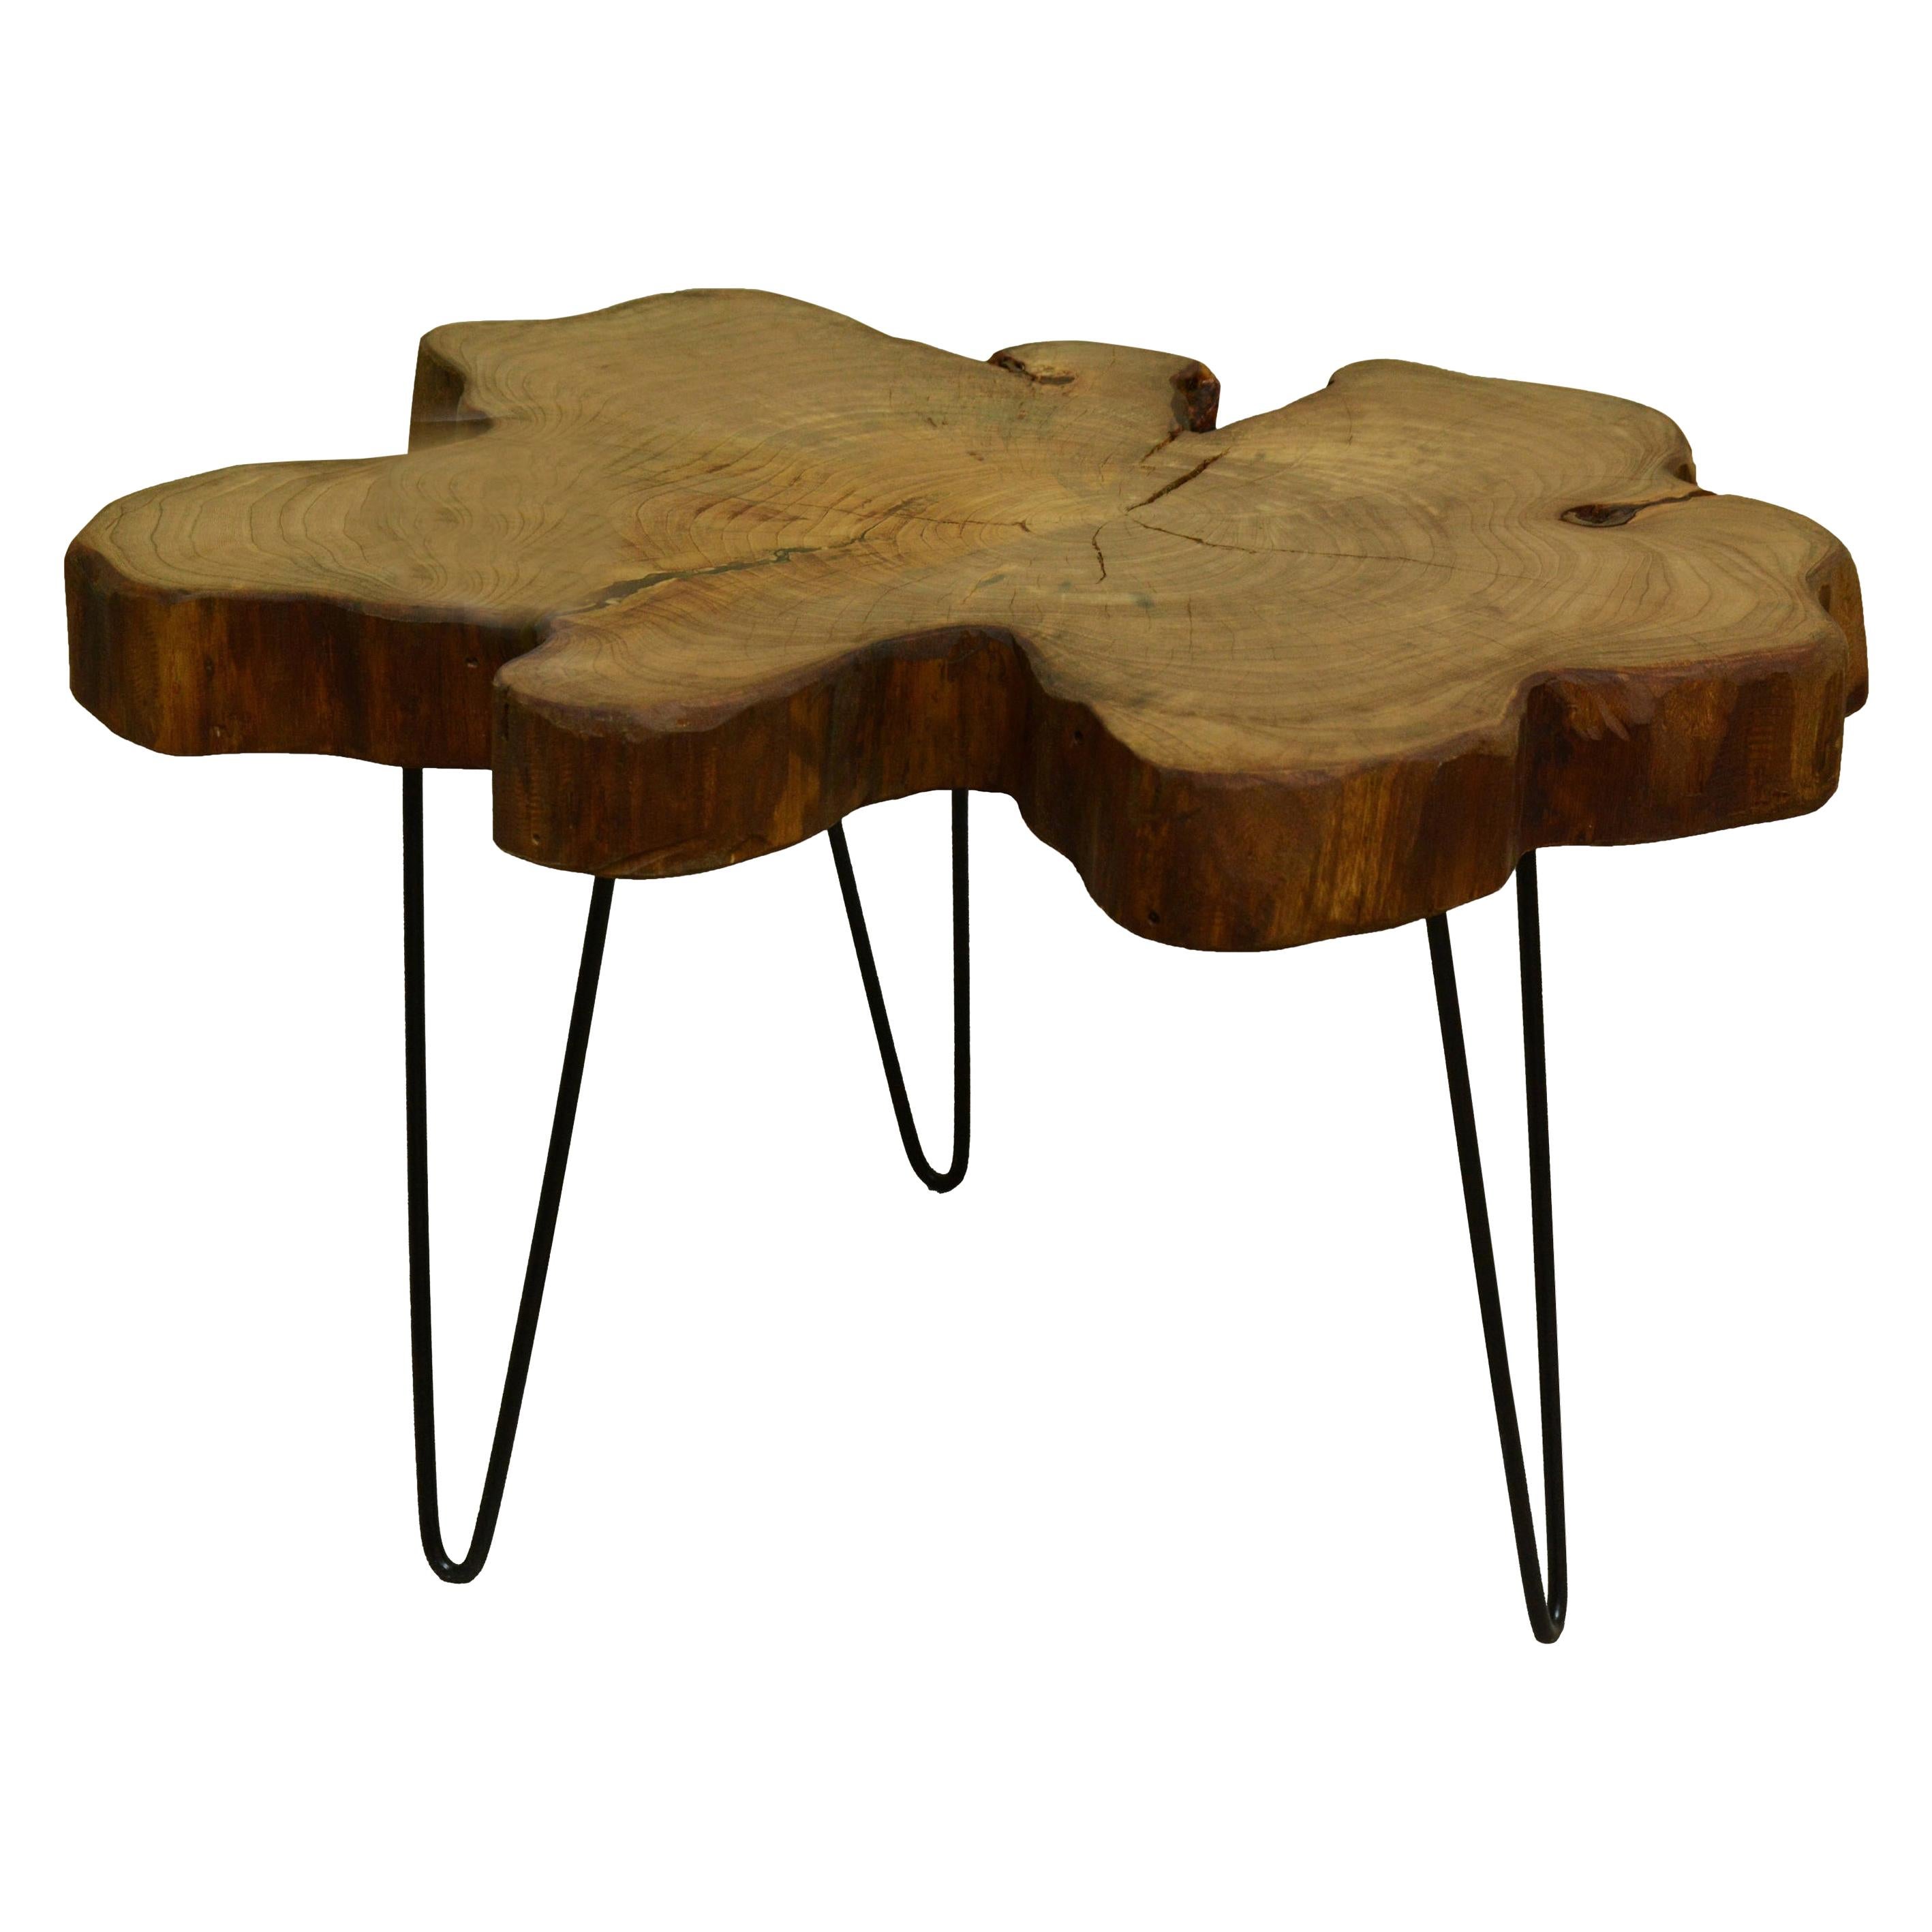 Redwood Tree Live Edge Coffee Table with Hairpin Legs / LECT134 For Sale